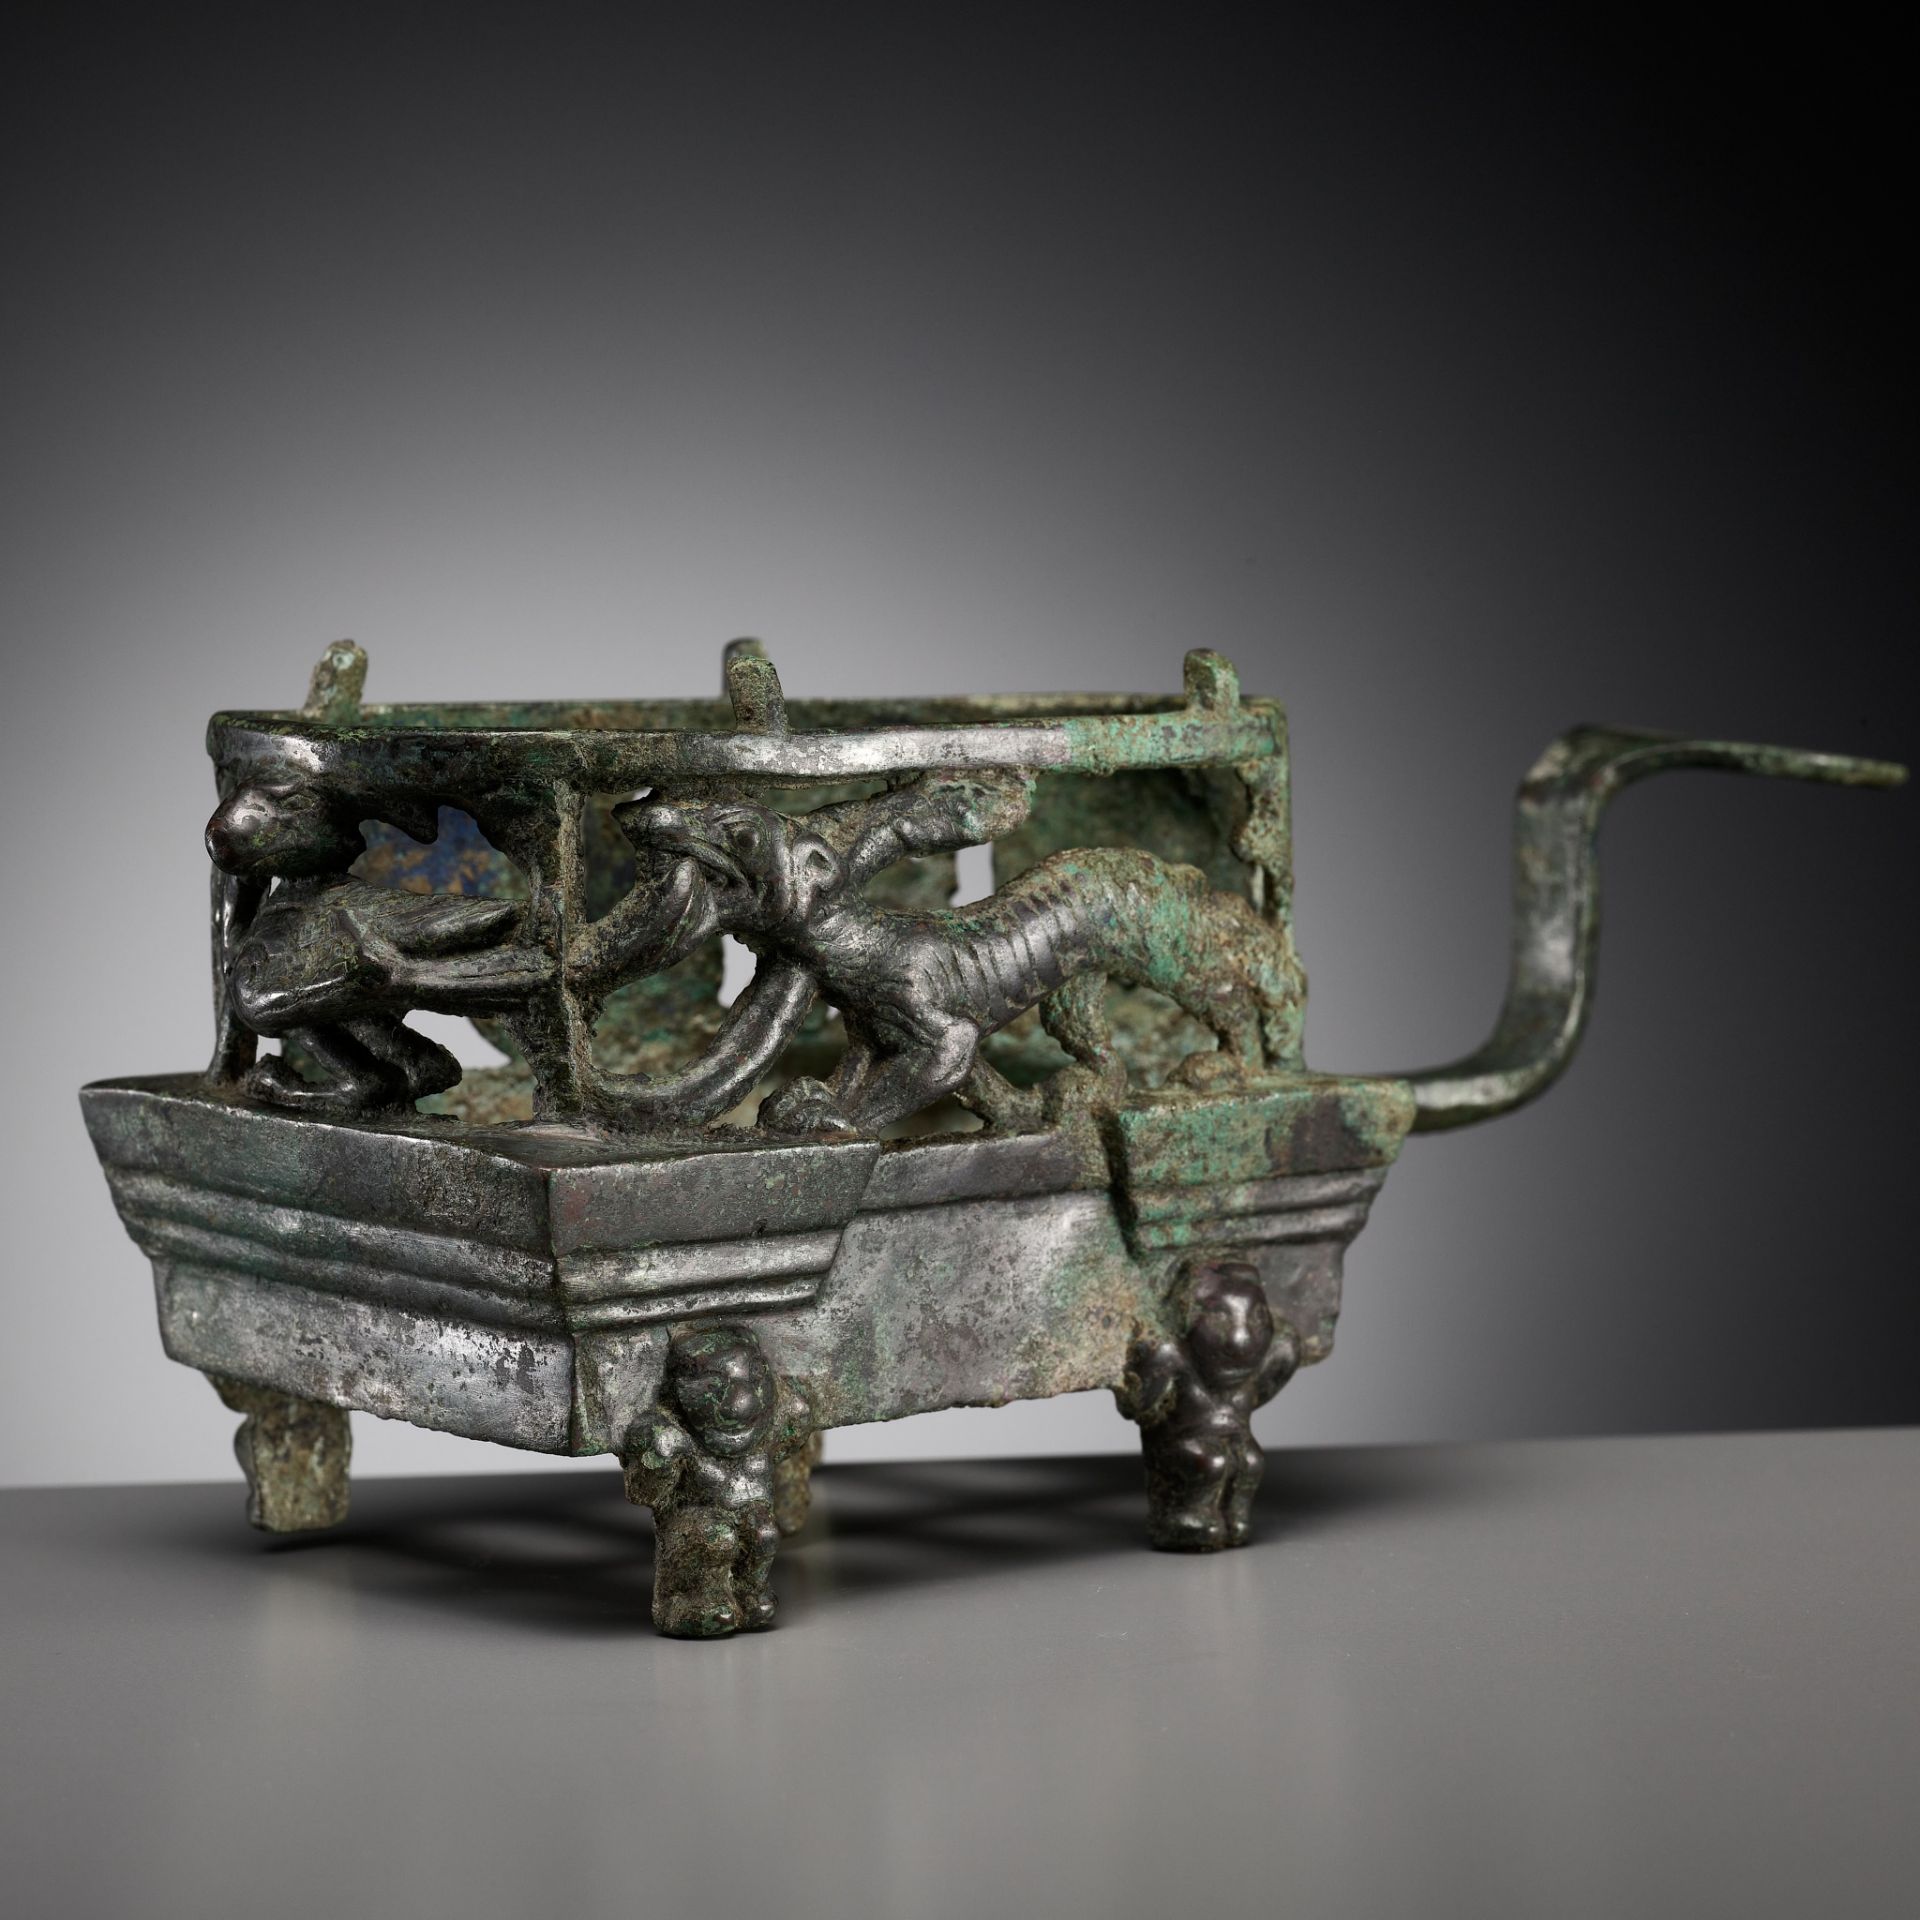 A 'FOUR AUSPICIOUS BEASTS' (SI XIANG) BRONZE BRAZIER, HAN DYNASTY, CHINA, 206 BC-220 AD